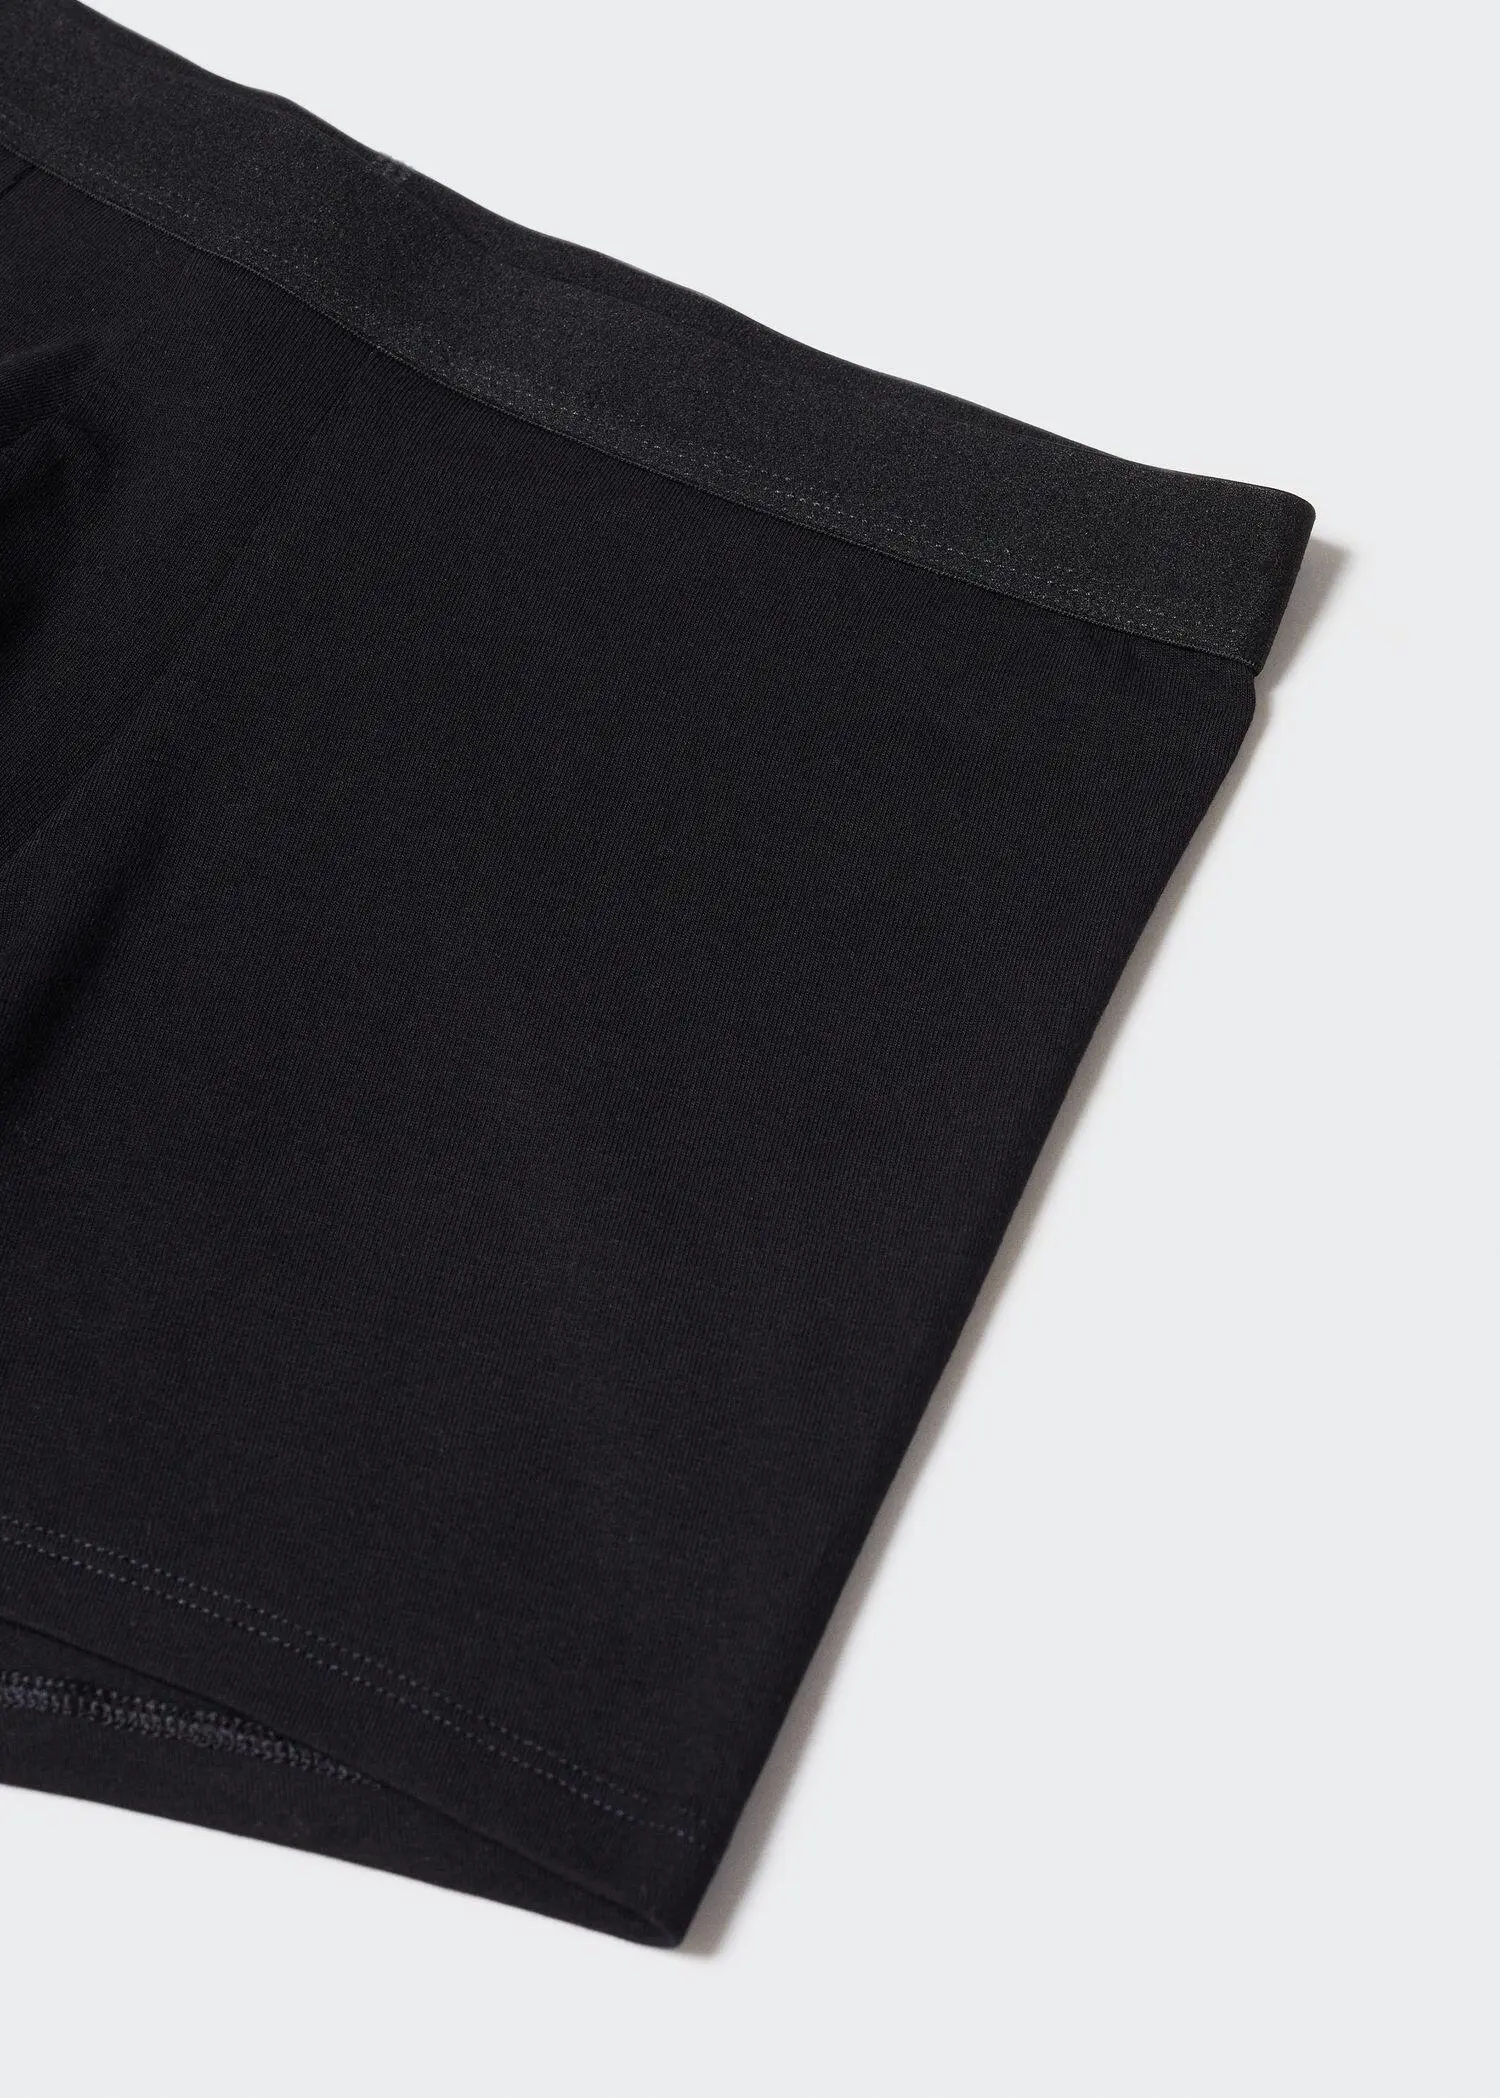 Mango 3-pack of black cotton boxer shorts. a close-up view of a pair of black shorts. 